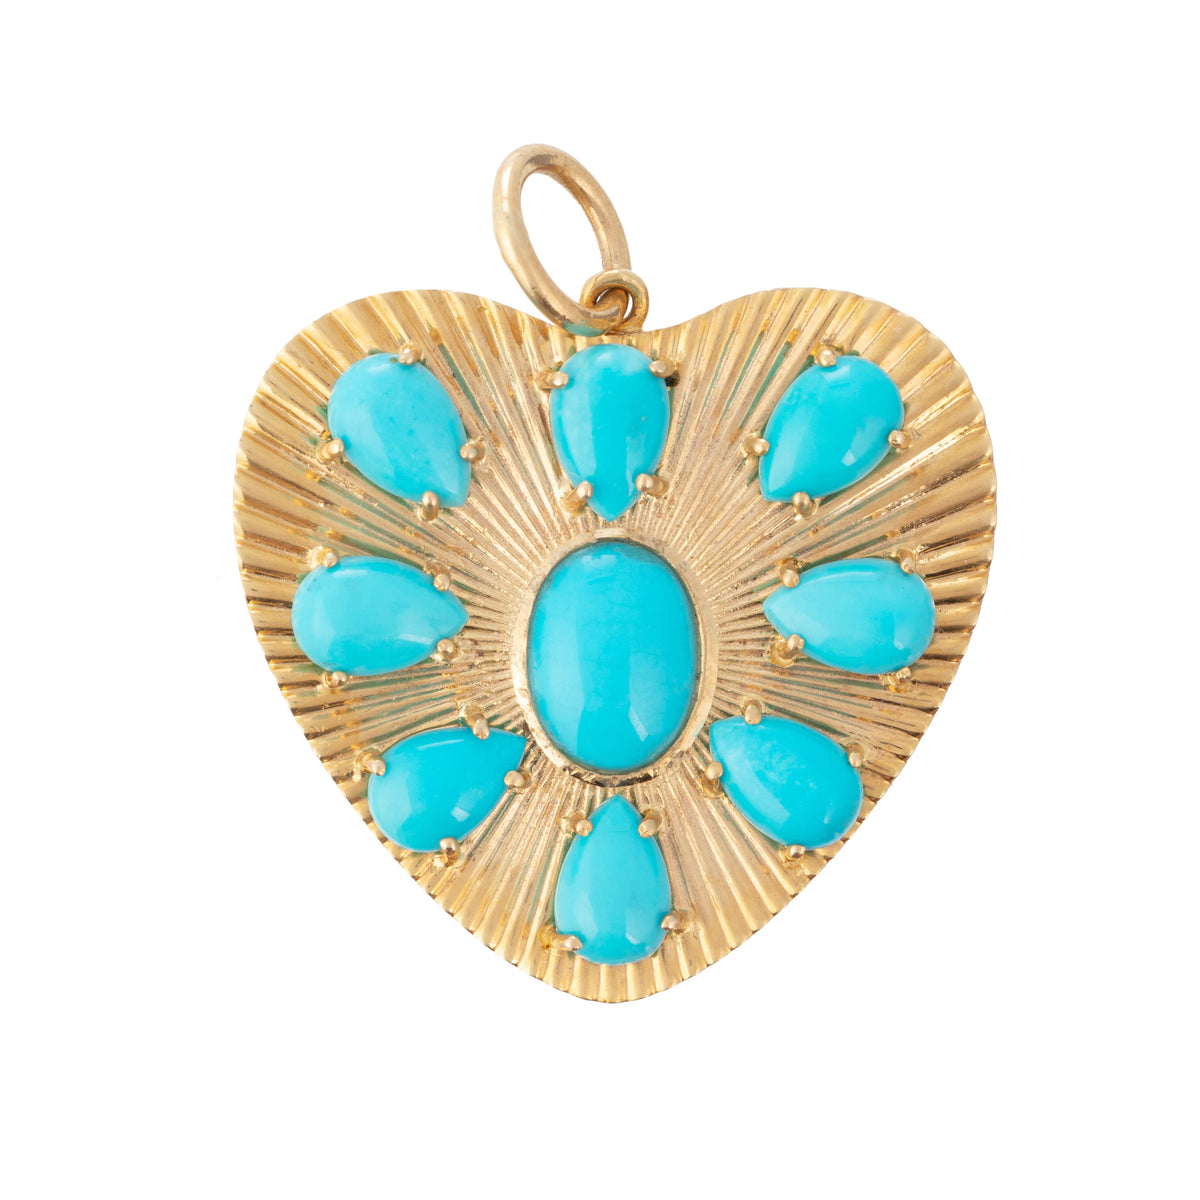 Enchantment Heart Charm with Turquoise